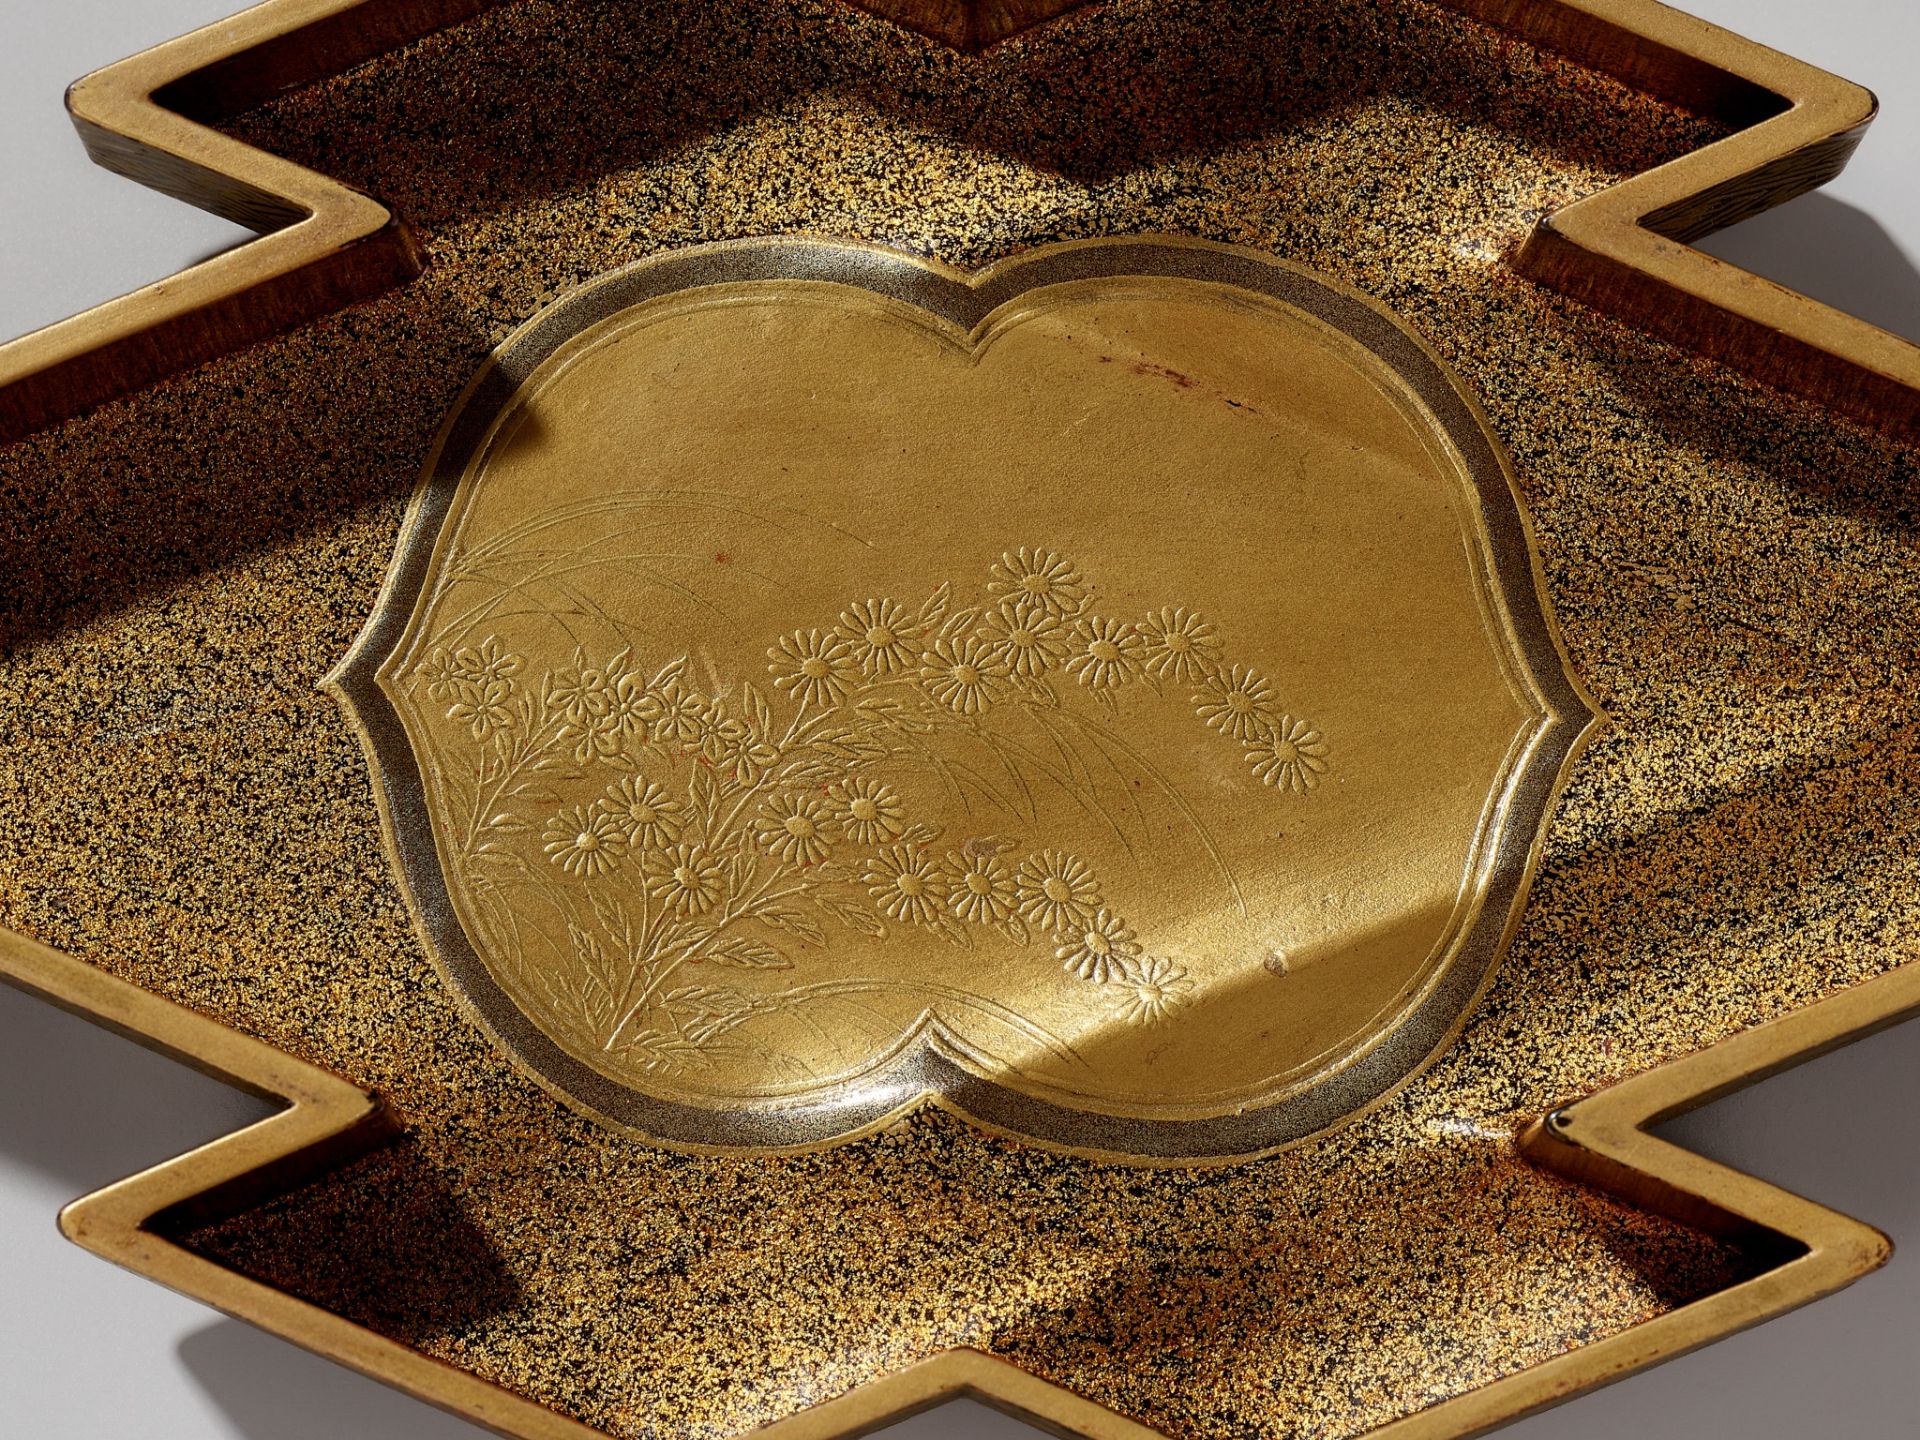 A FINE LACQUER BOX AND COVER WITH INTERIOR TRAY - Image 8 of 11